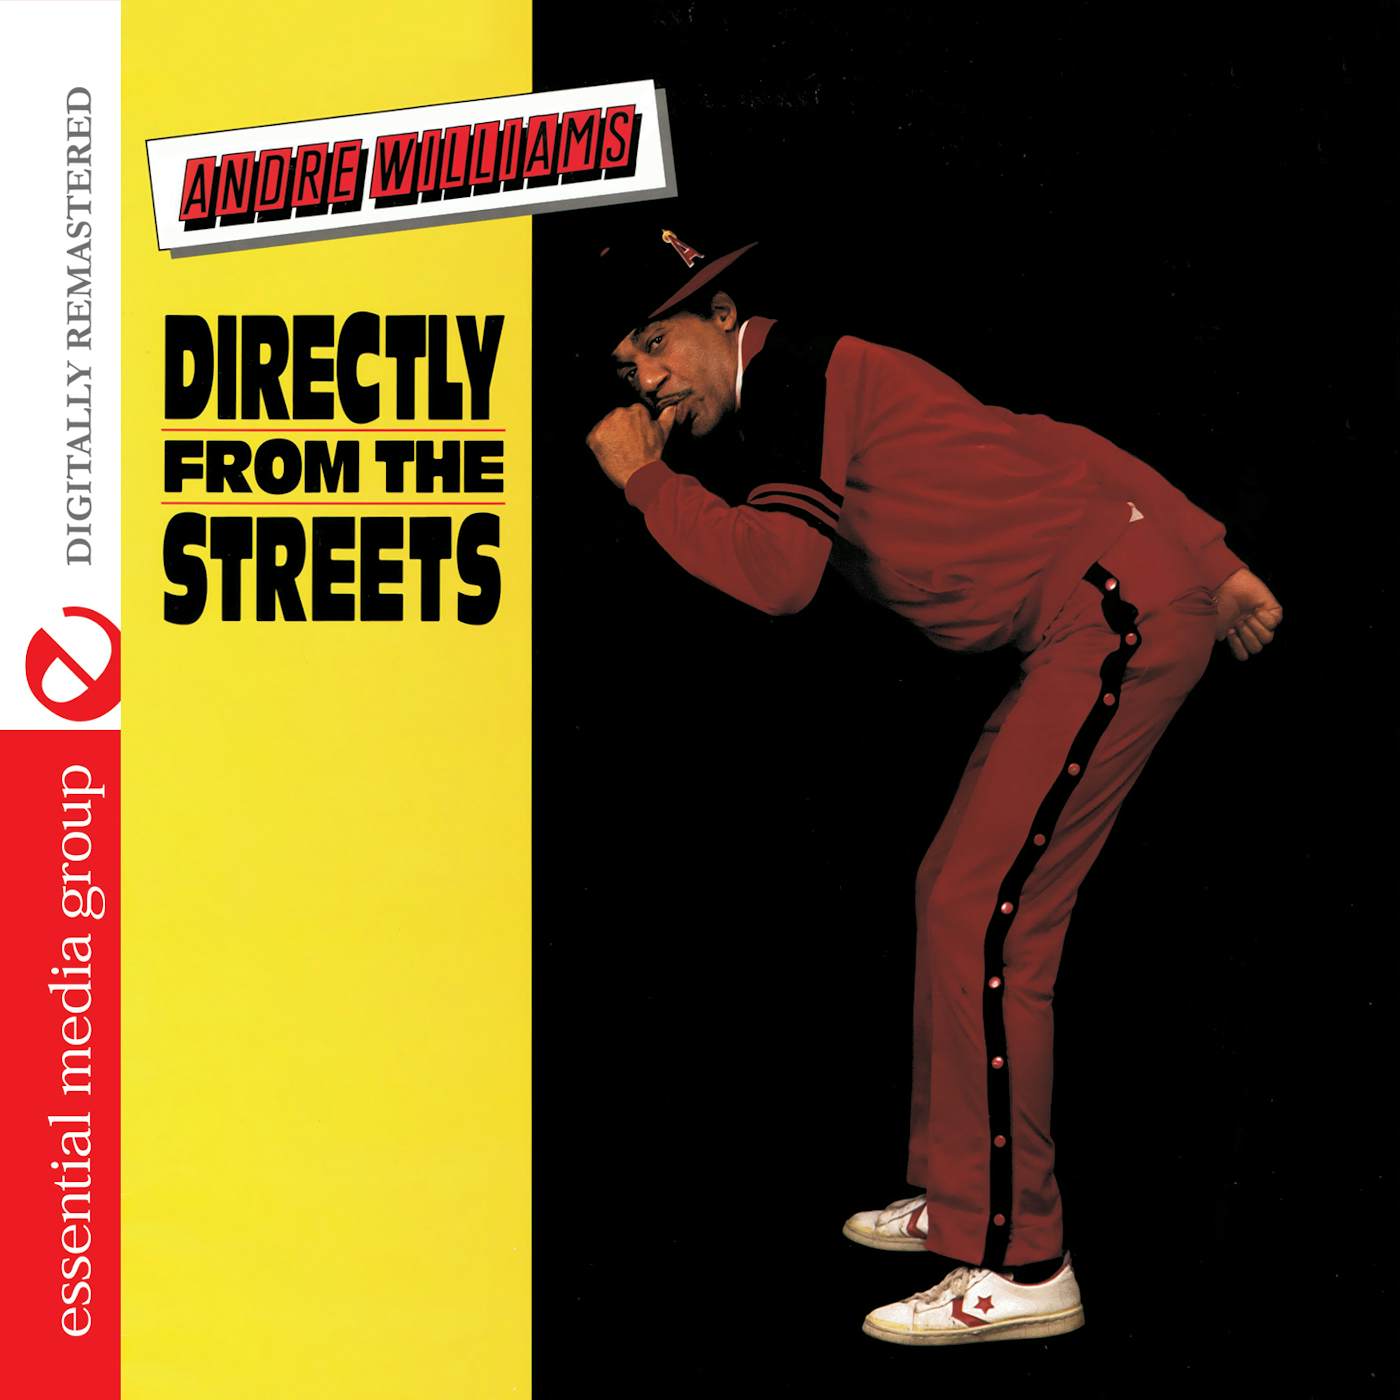 Andre Williams DIRECTLY FROM STREETS CD